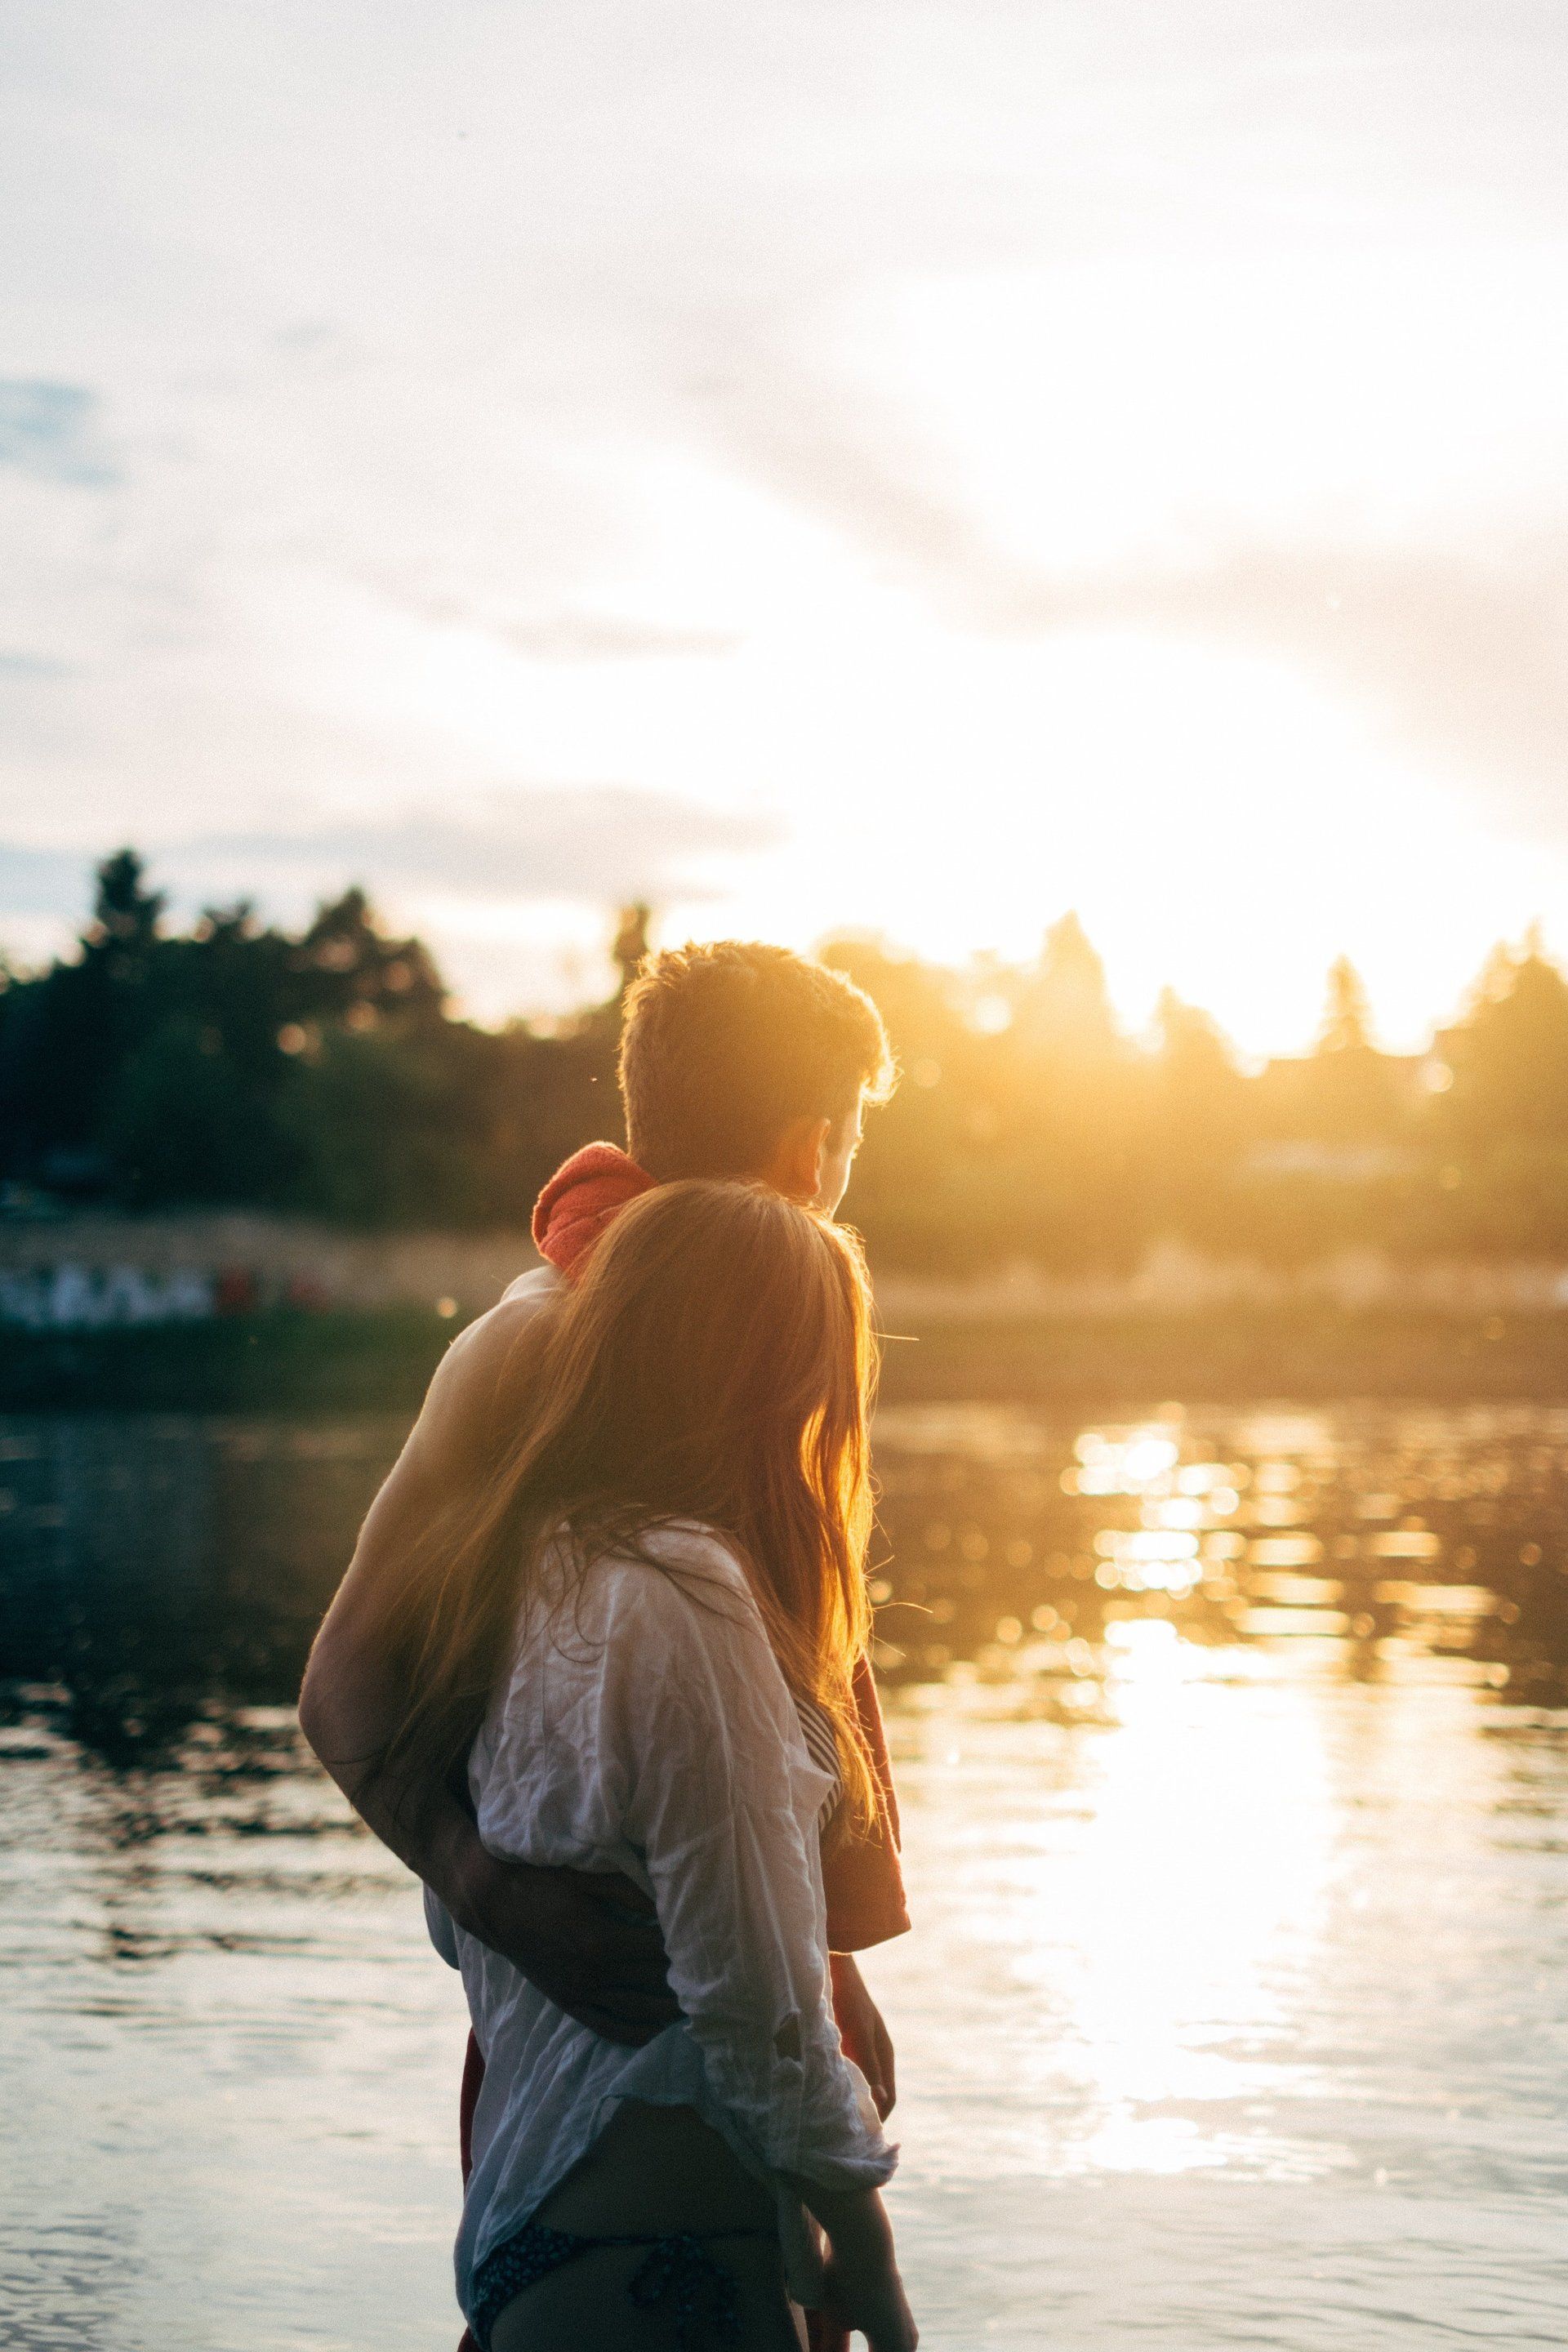 Young man and woman with arms around each other, walking beside and looking at a pond with sun setting in background.